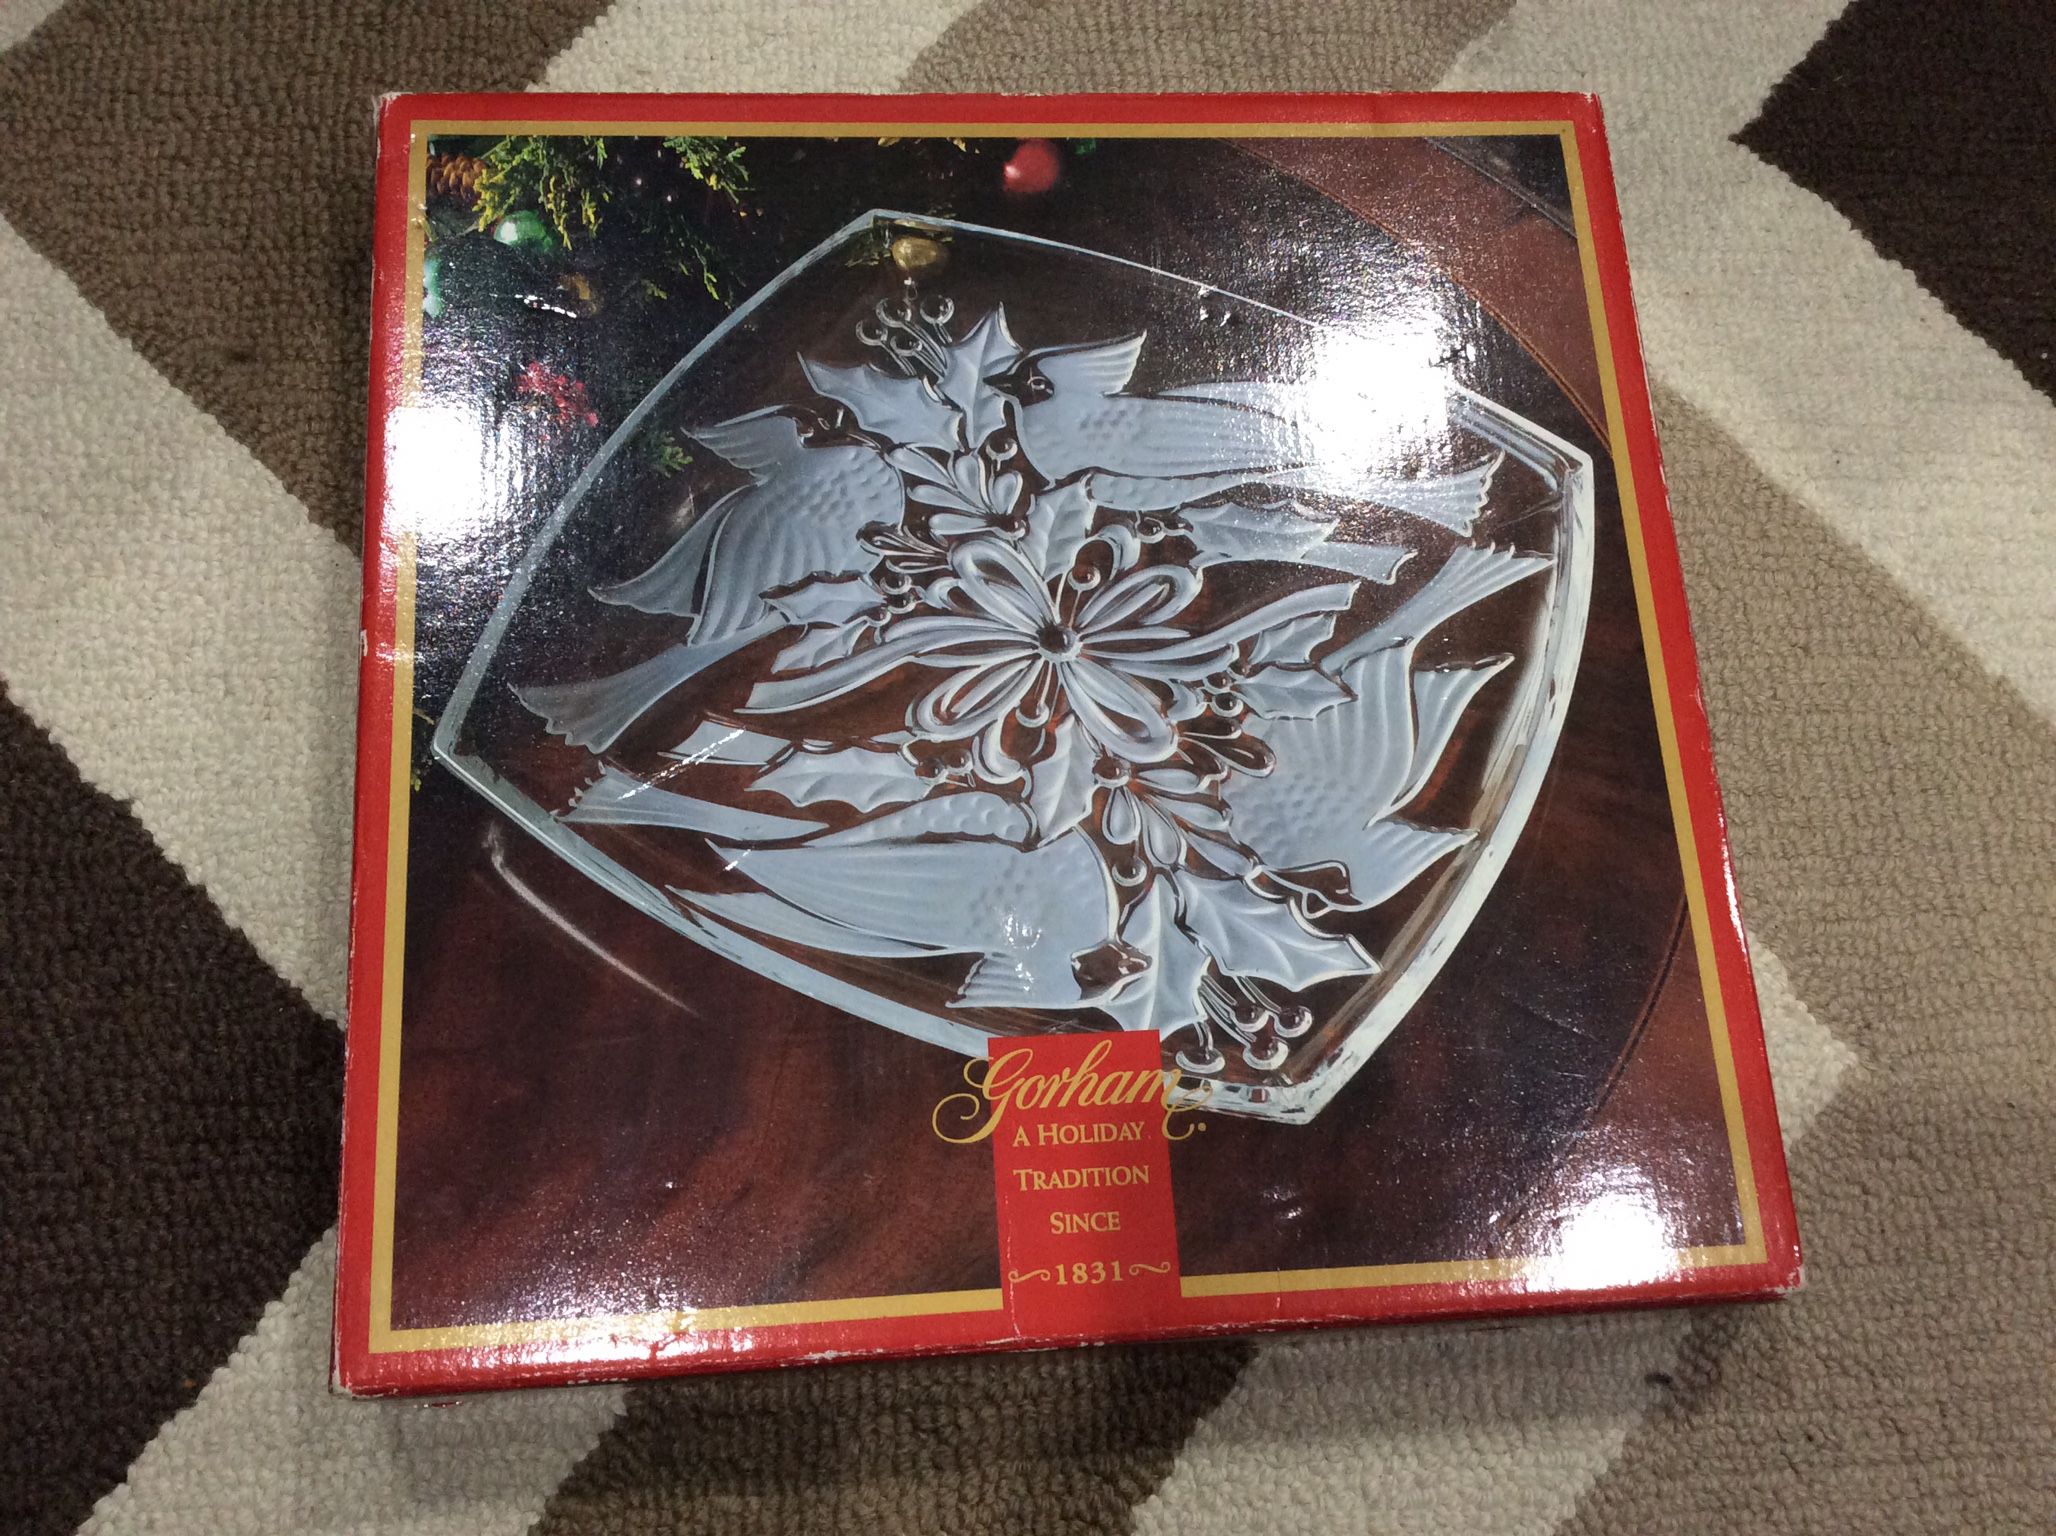 Gotham Holiday Traditions Christmas Cardinals 13” Square Platter - Crystal